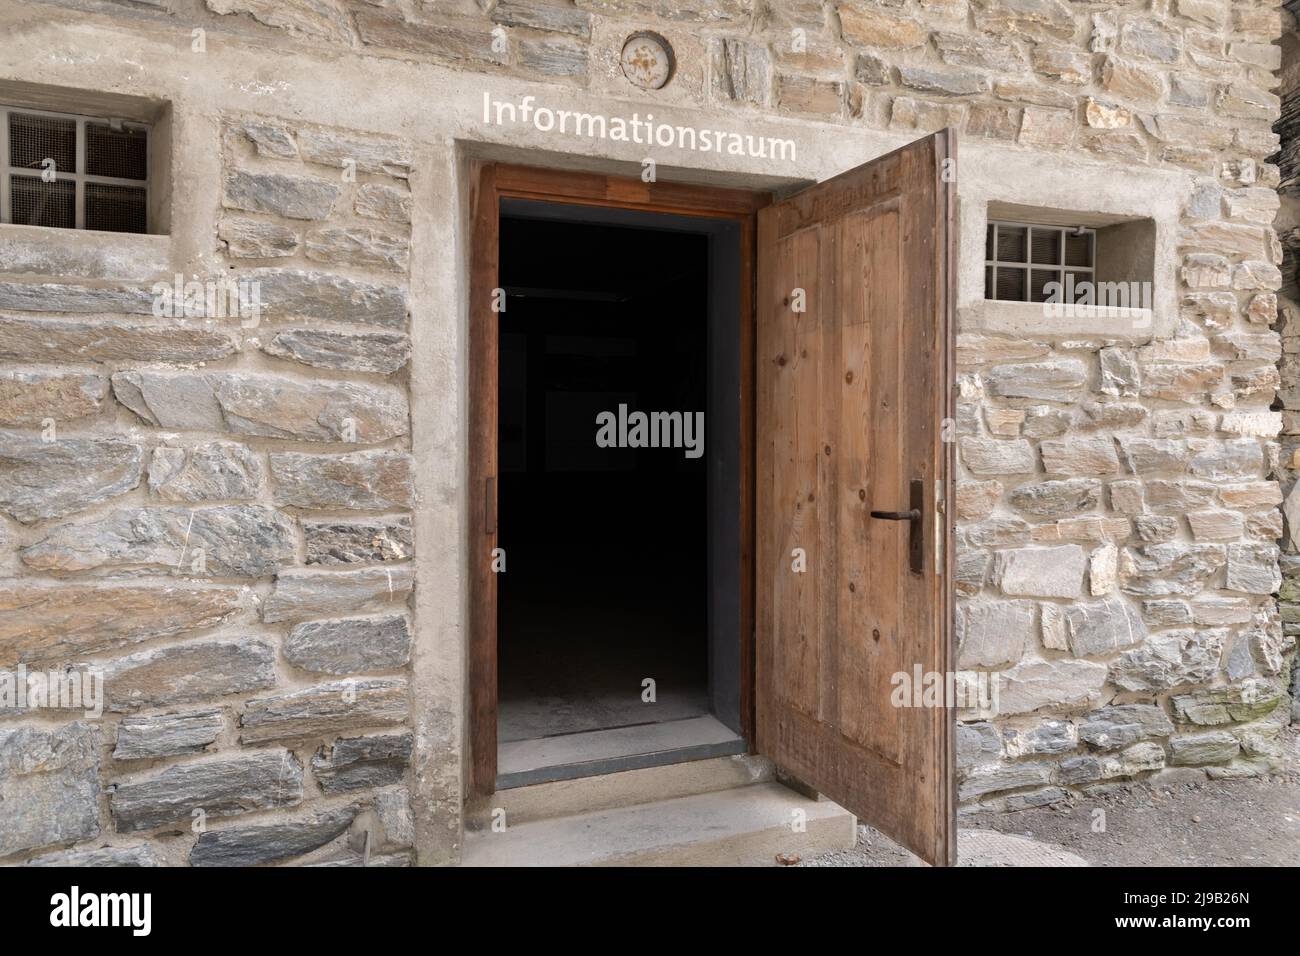 Zillis, Grison, Switzerland, April 12, 2022 Open door to an information room at the Viamala canyon Stock Photo